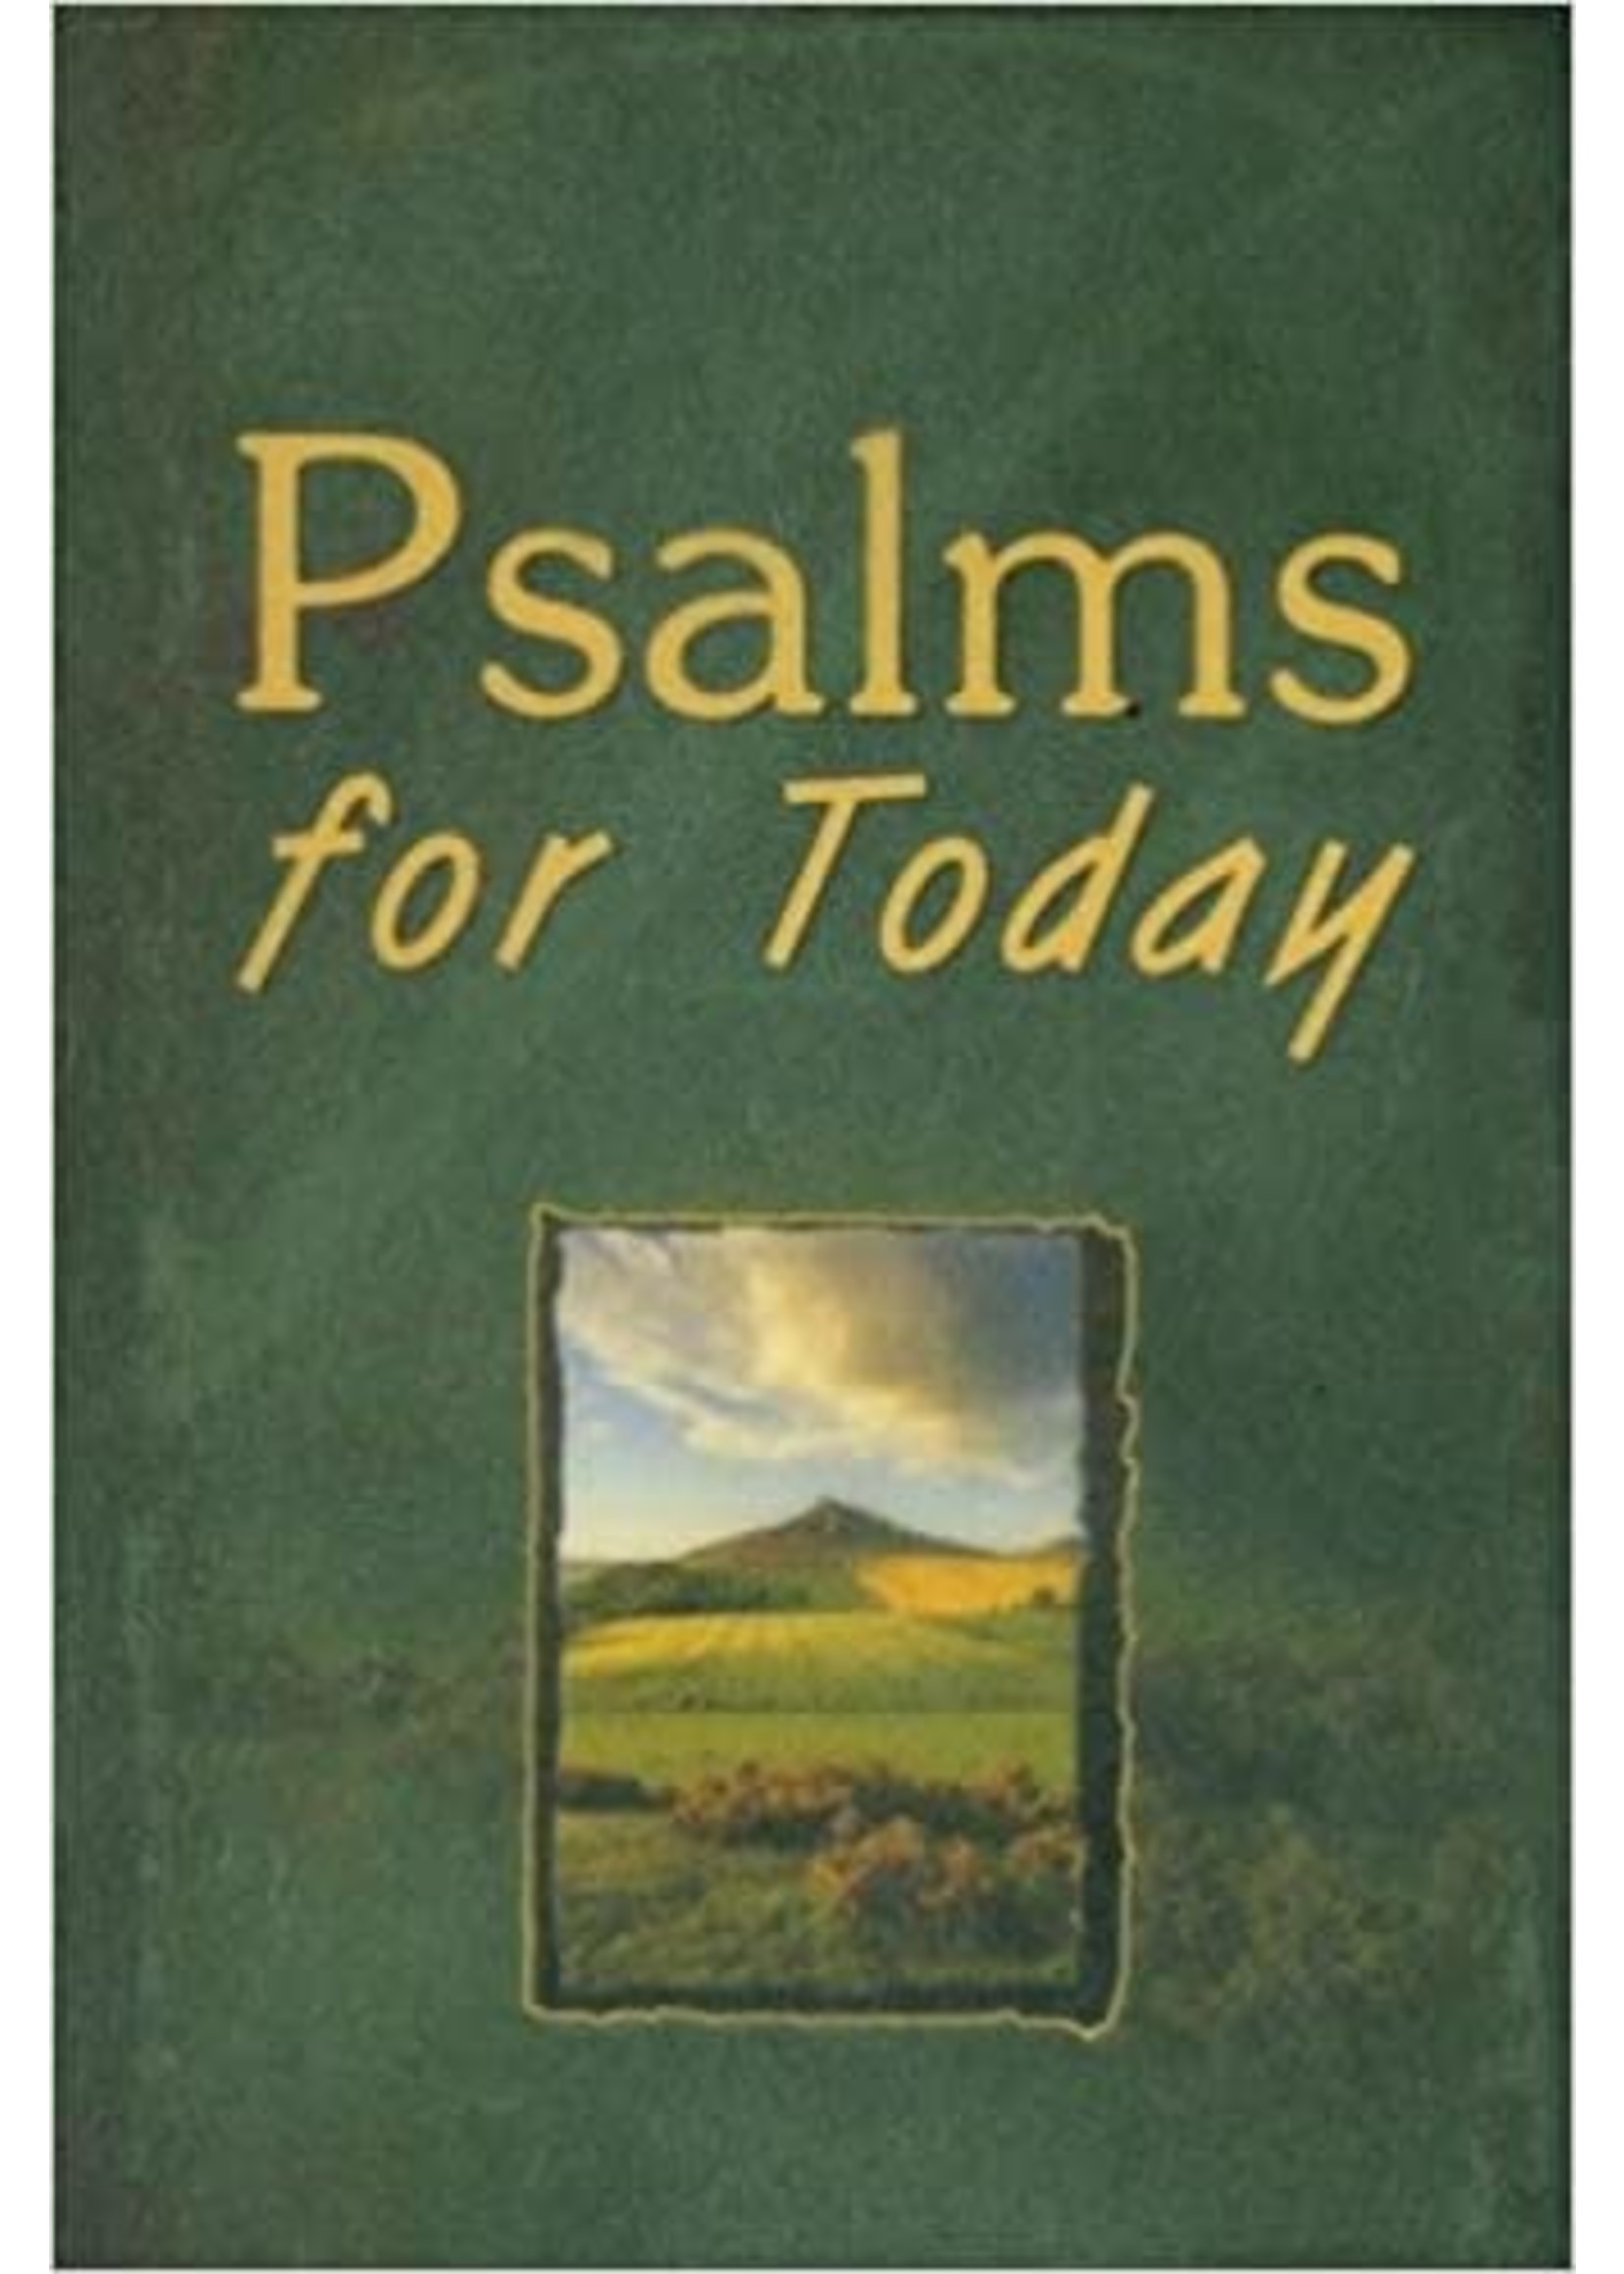 Psalms for today